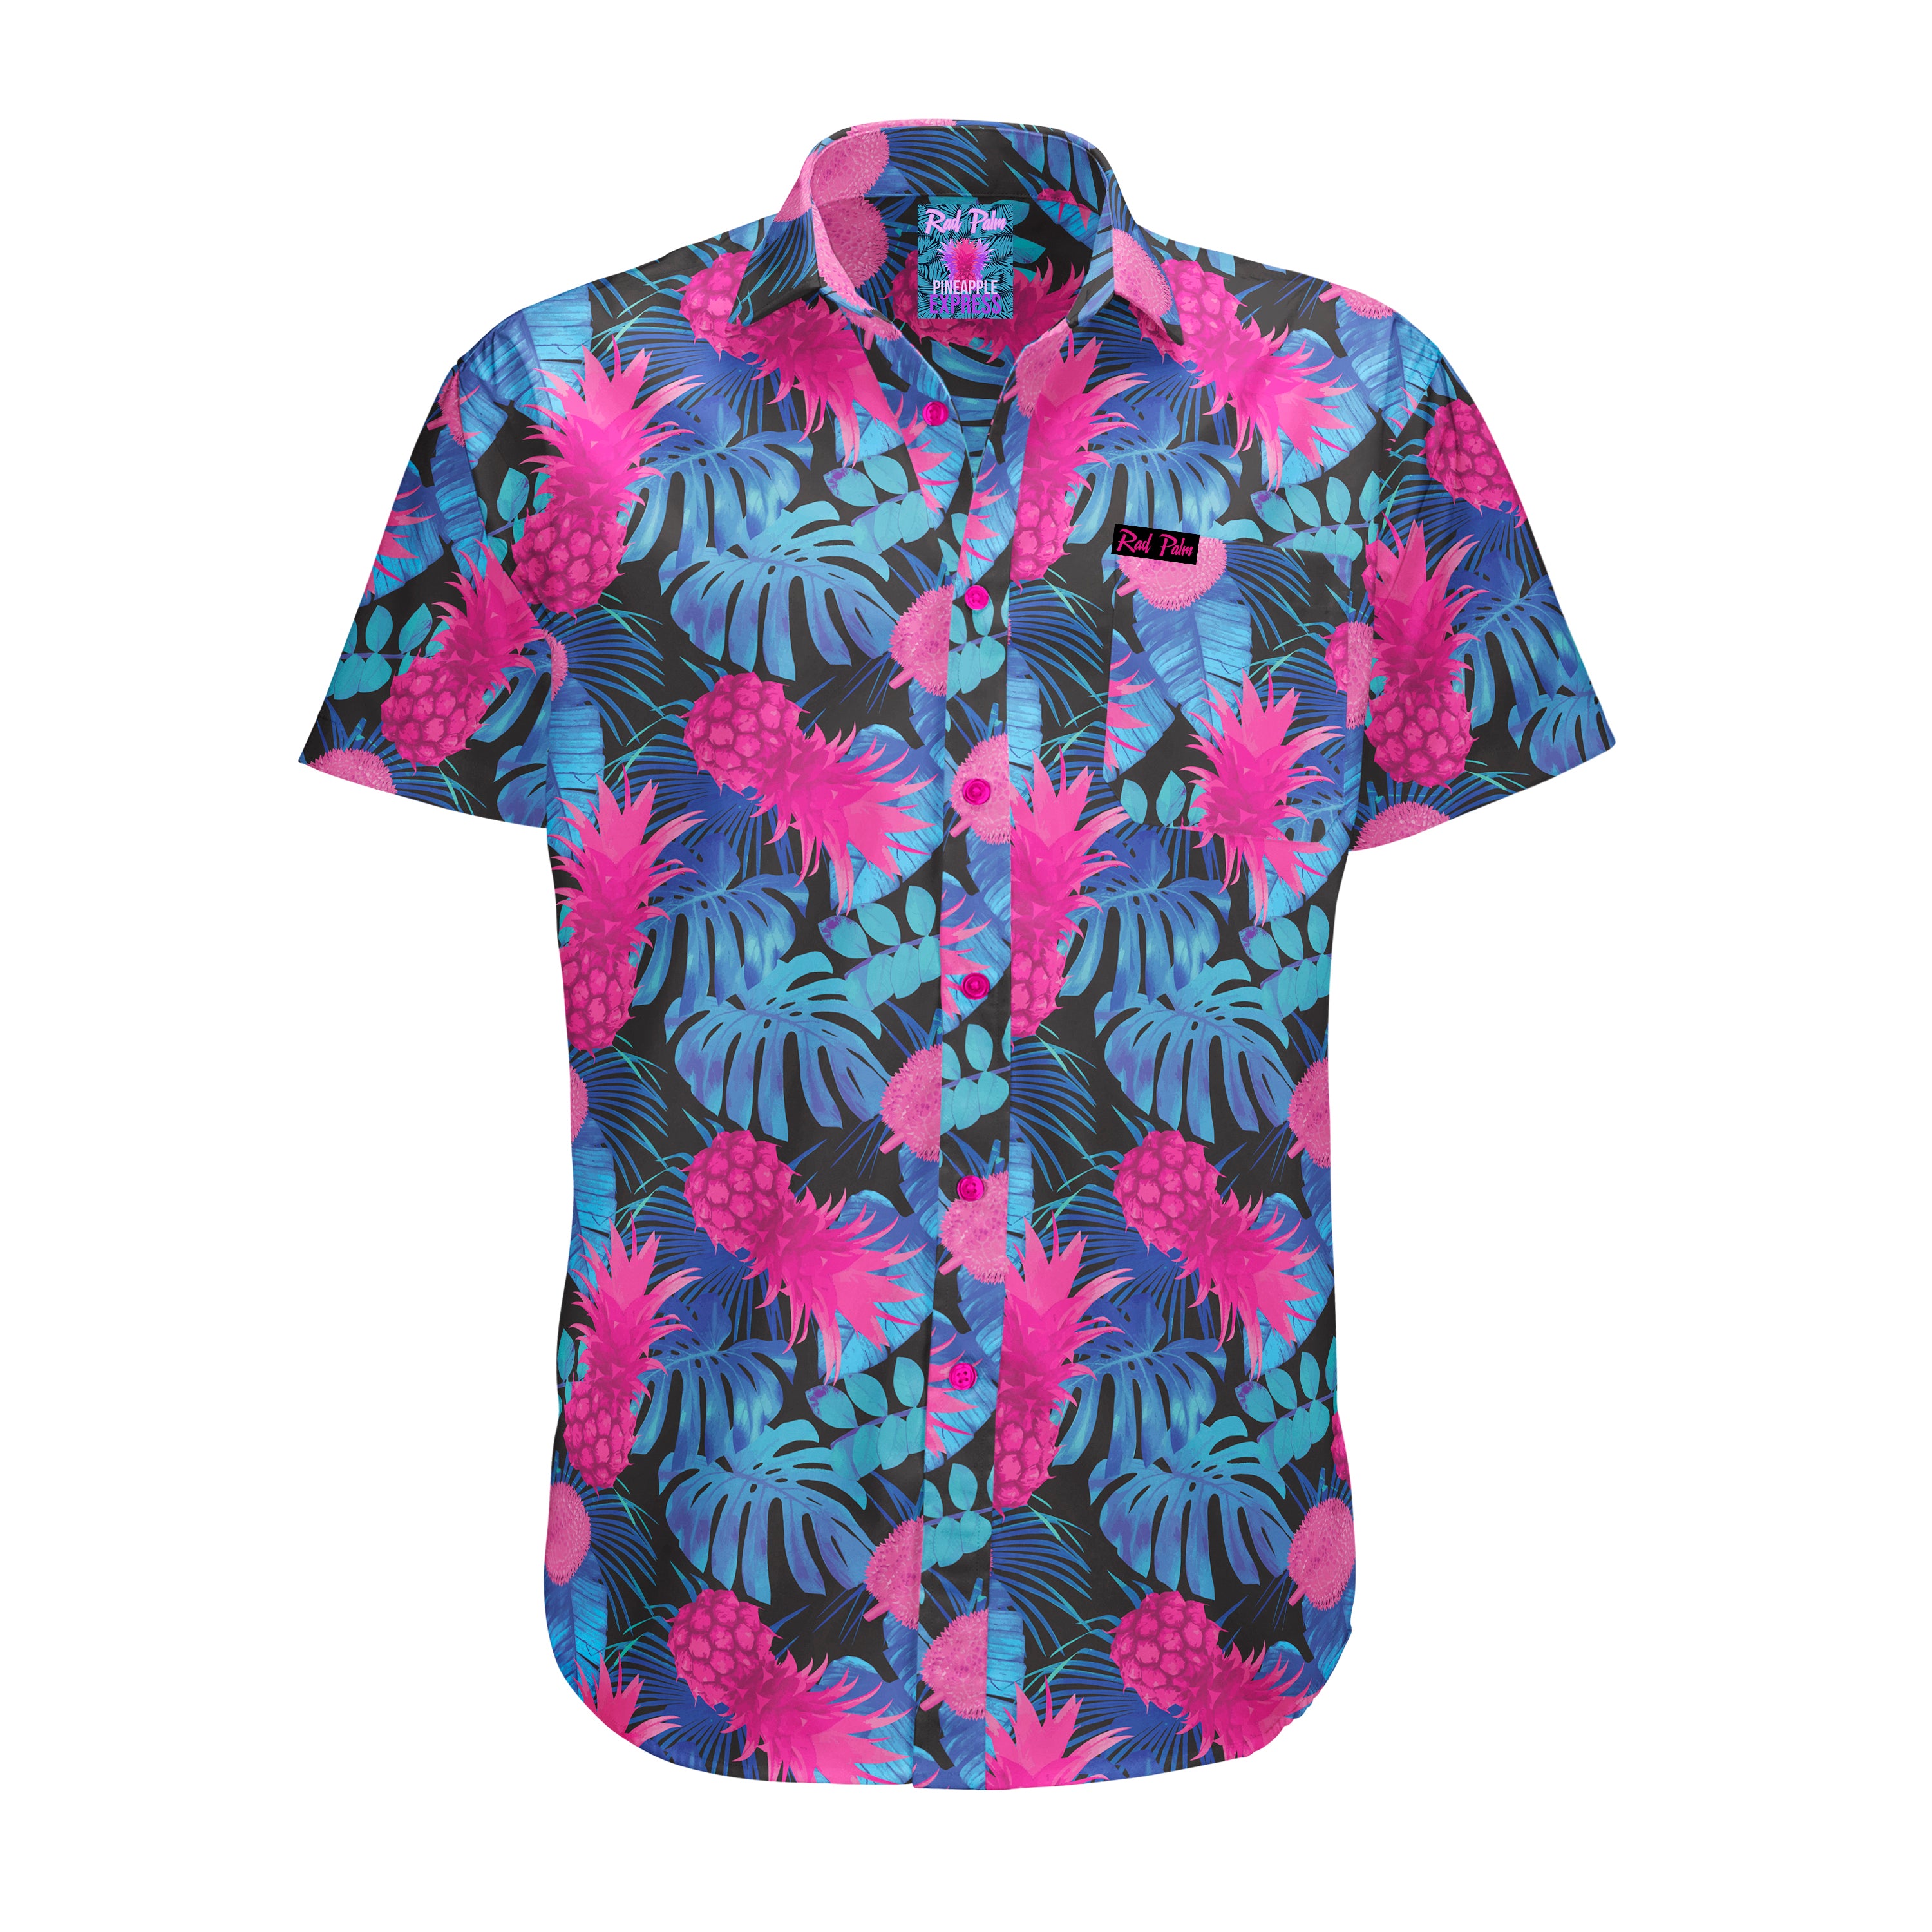 Pineapple Express Party Shirt